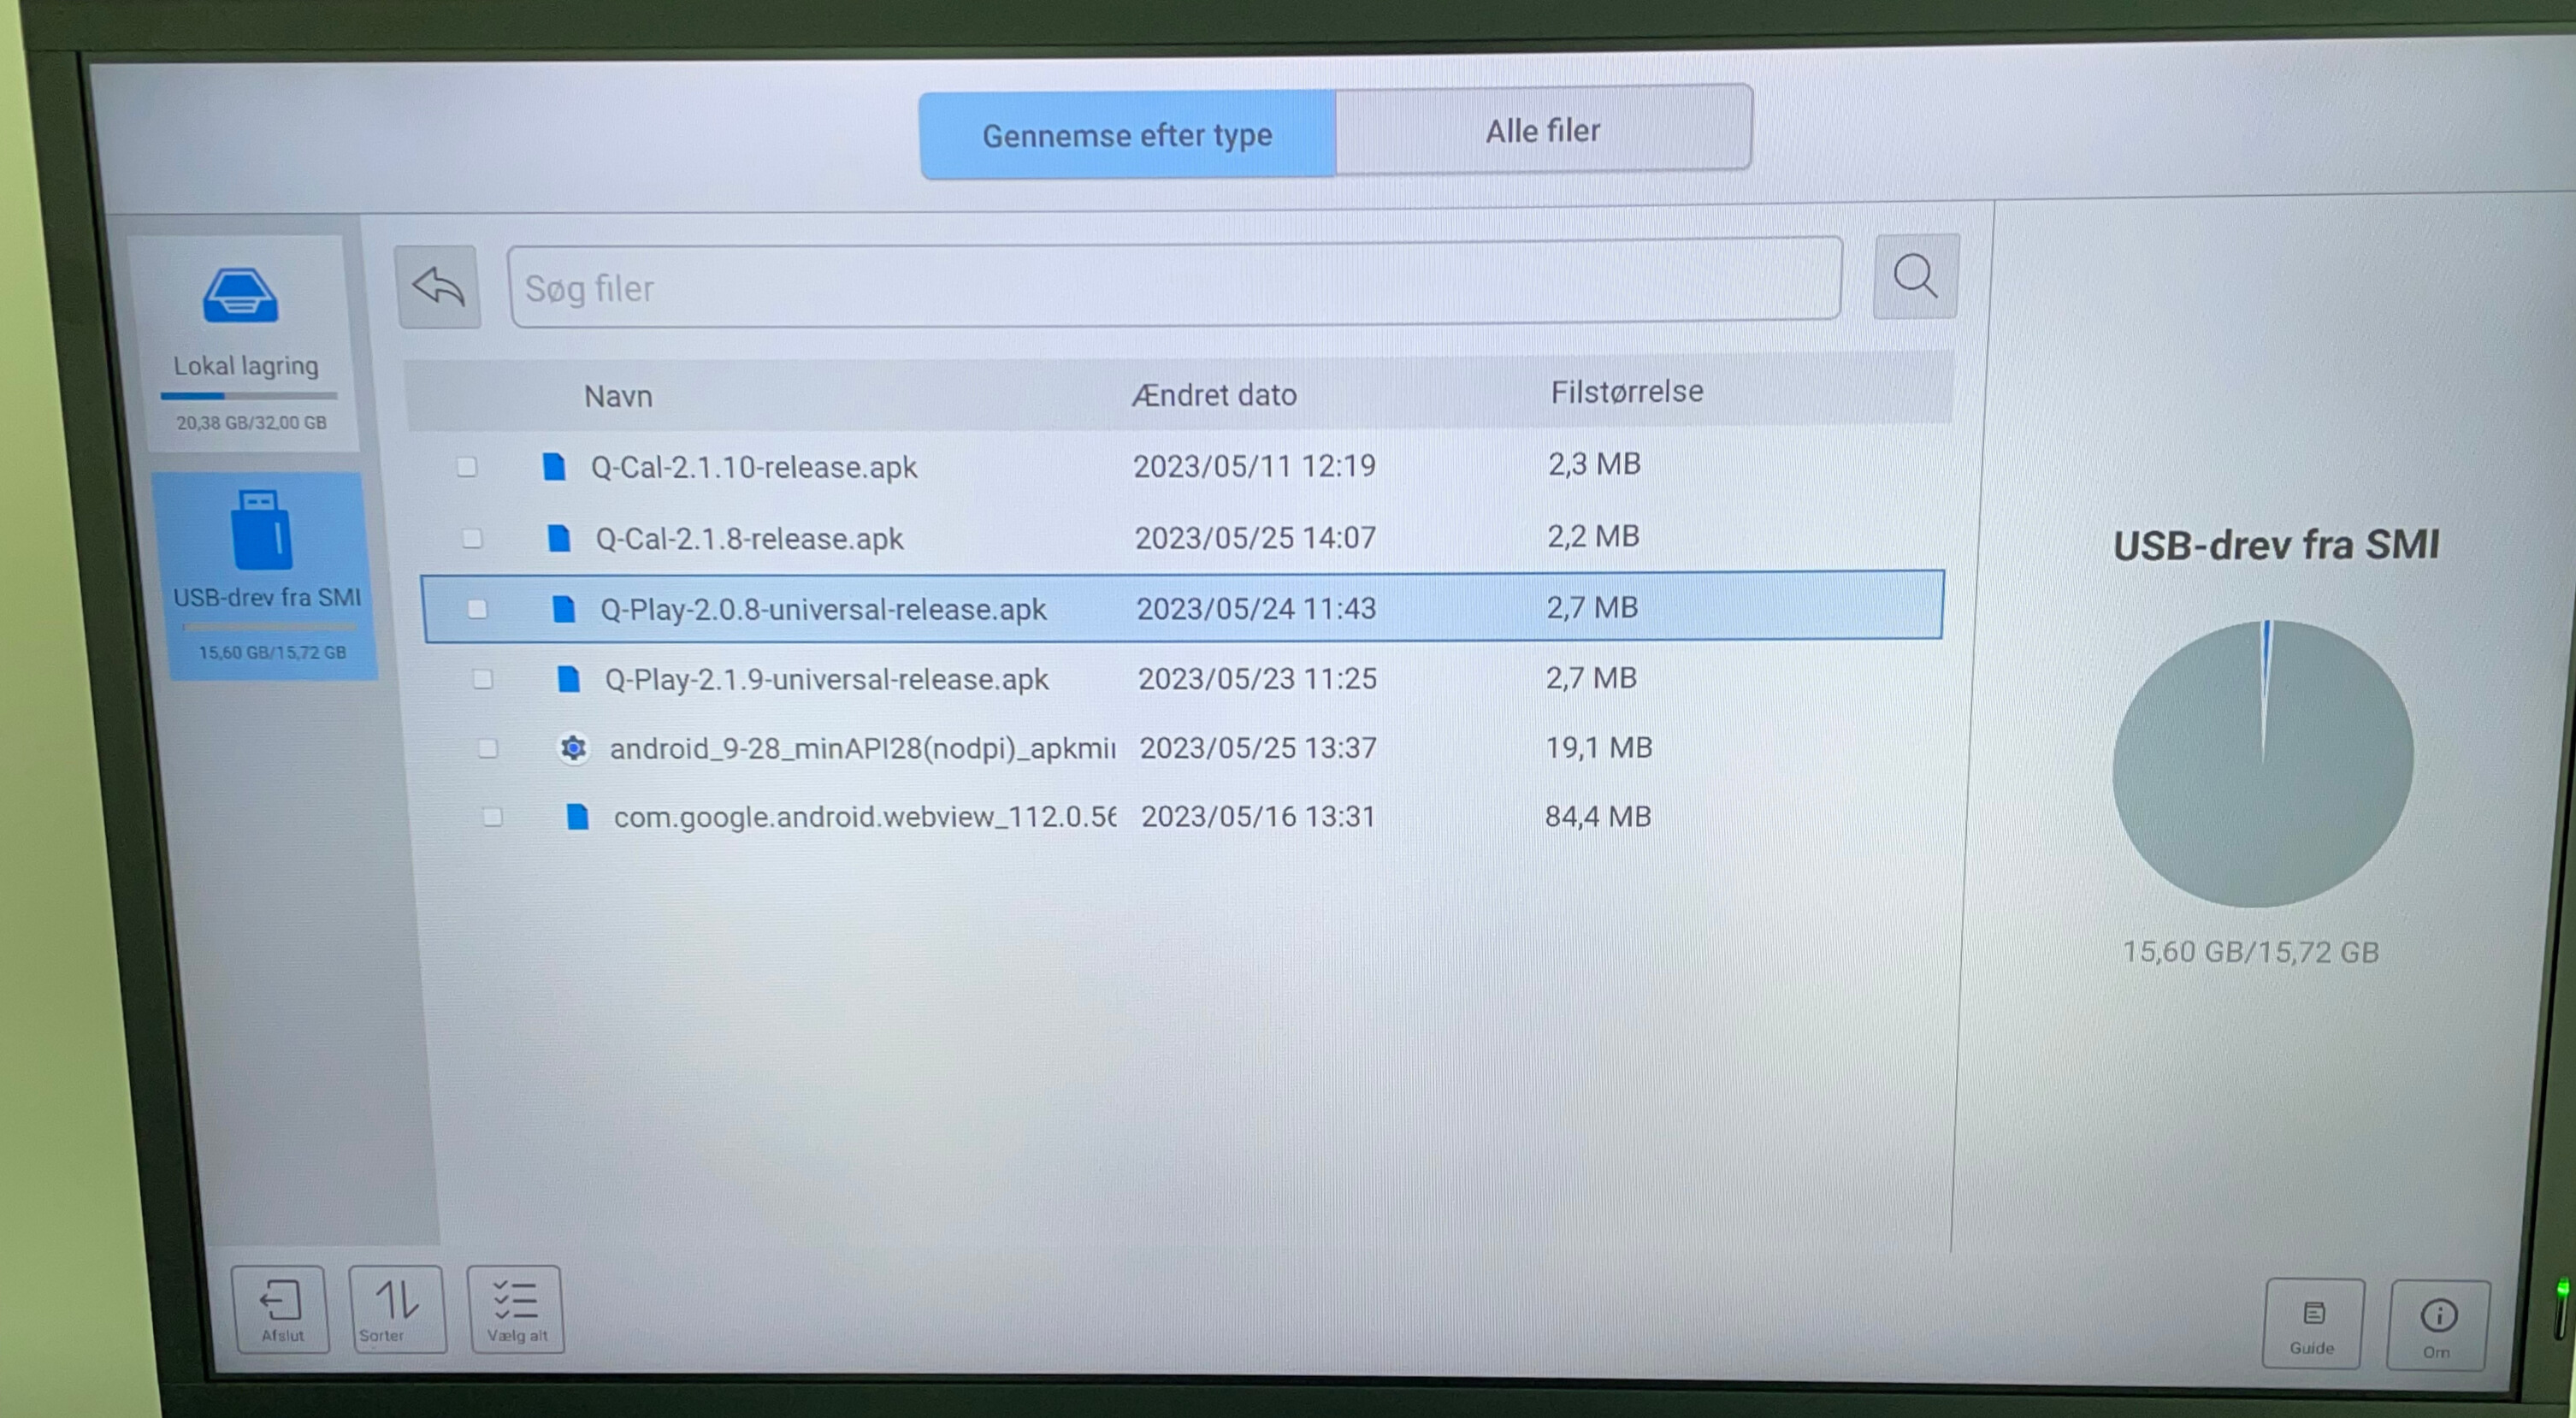 File manager interface displaying a list of APK files with names, modification dates, and file sizes, alongside a USB drive storage usage chart.